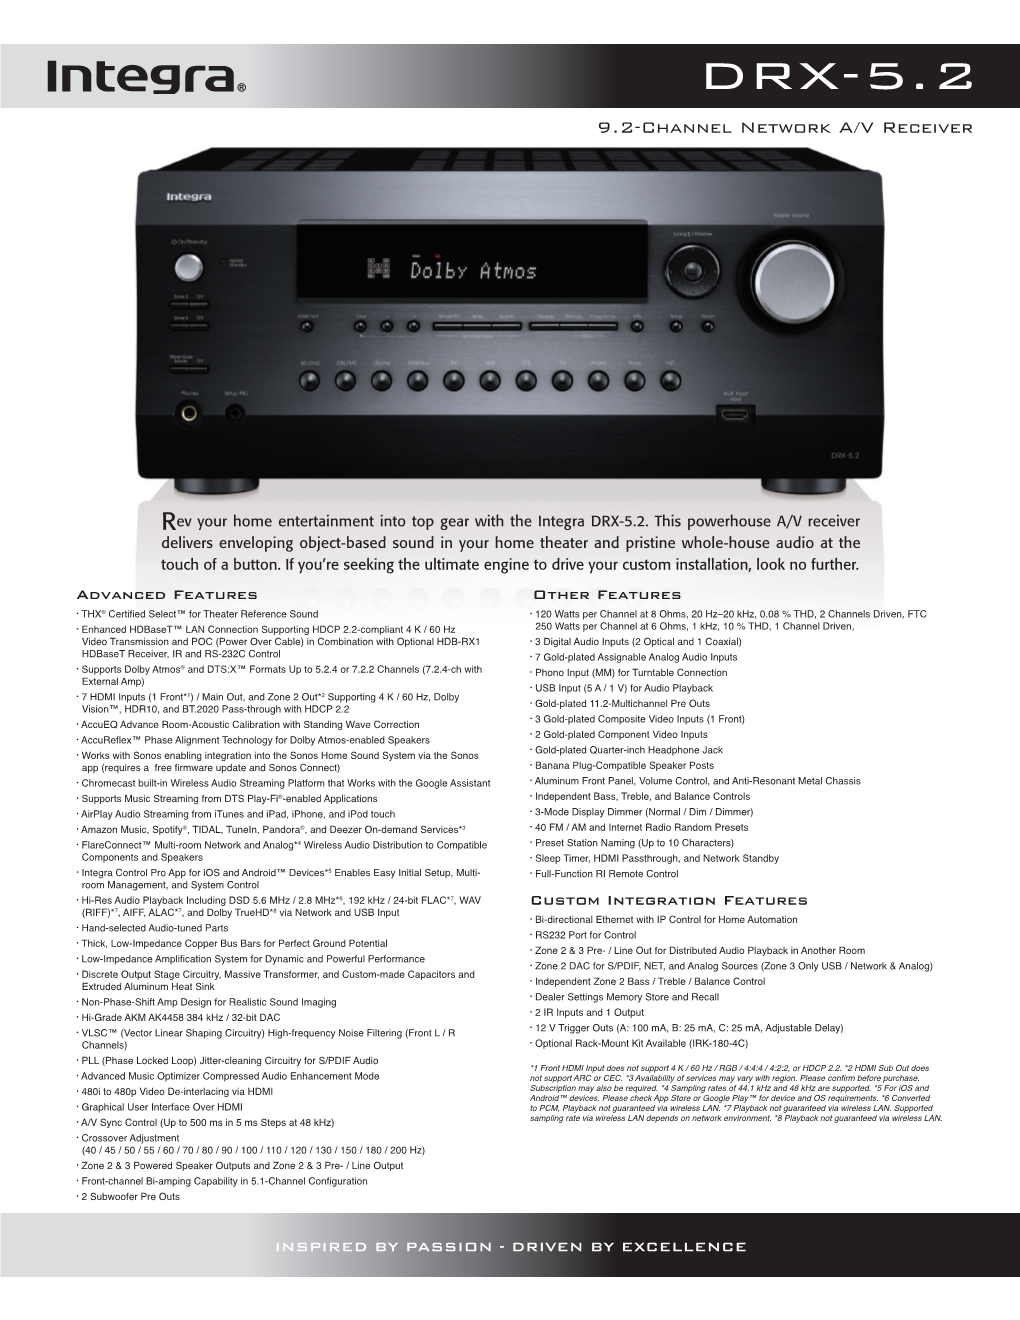 DRX-5.2 9.2-Channel Network A/V Receiver